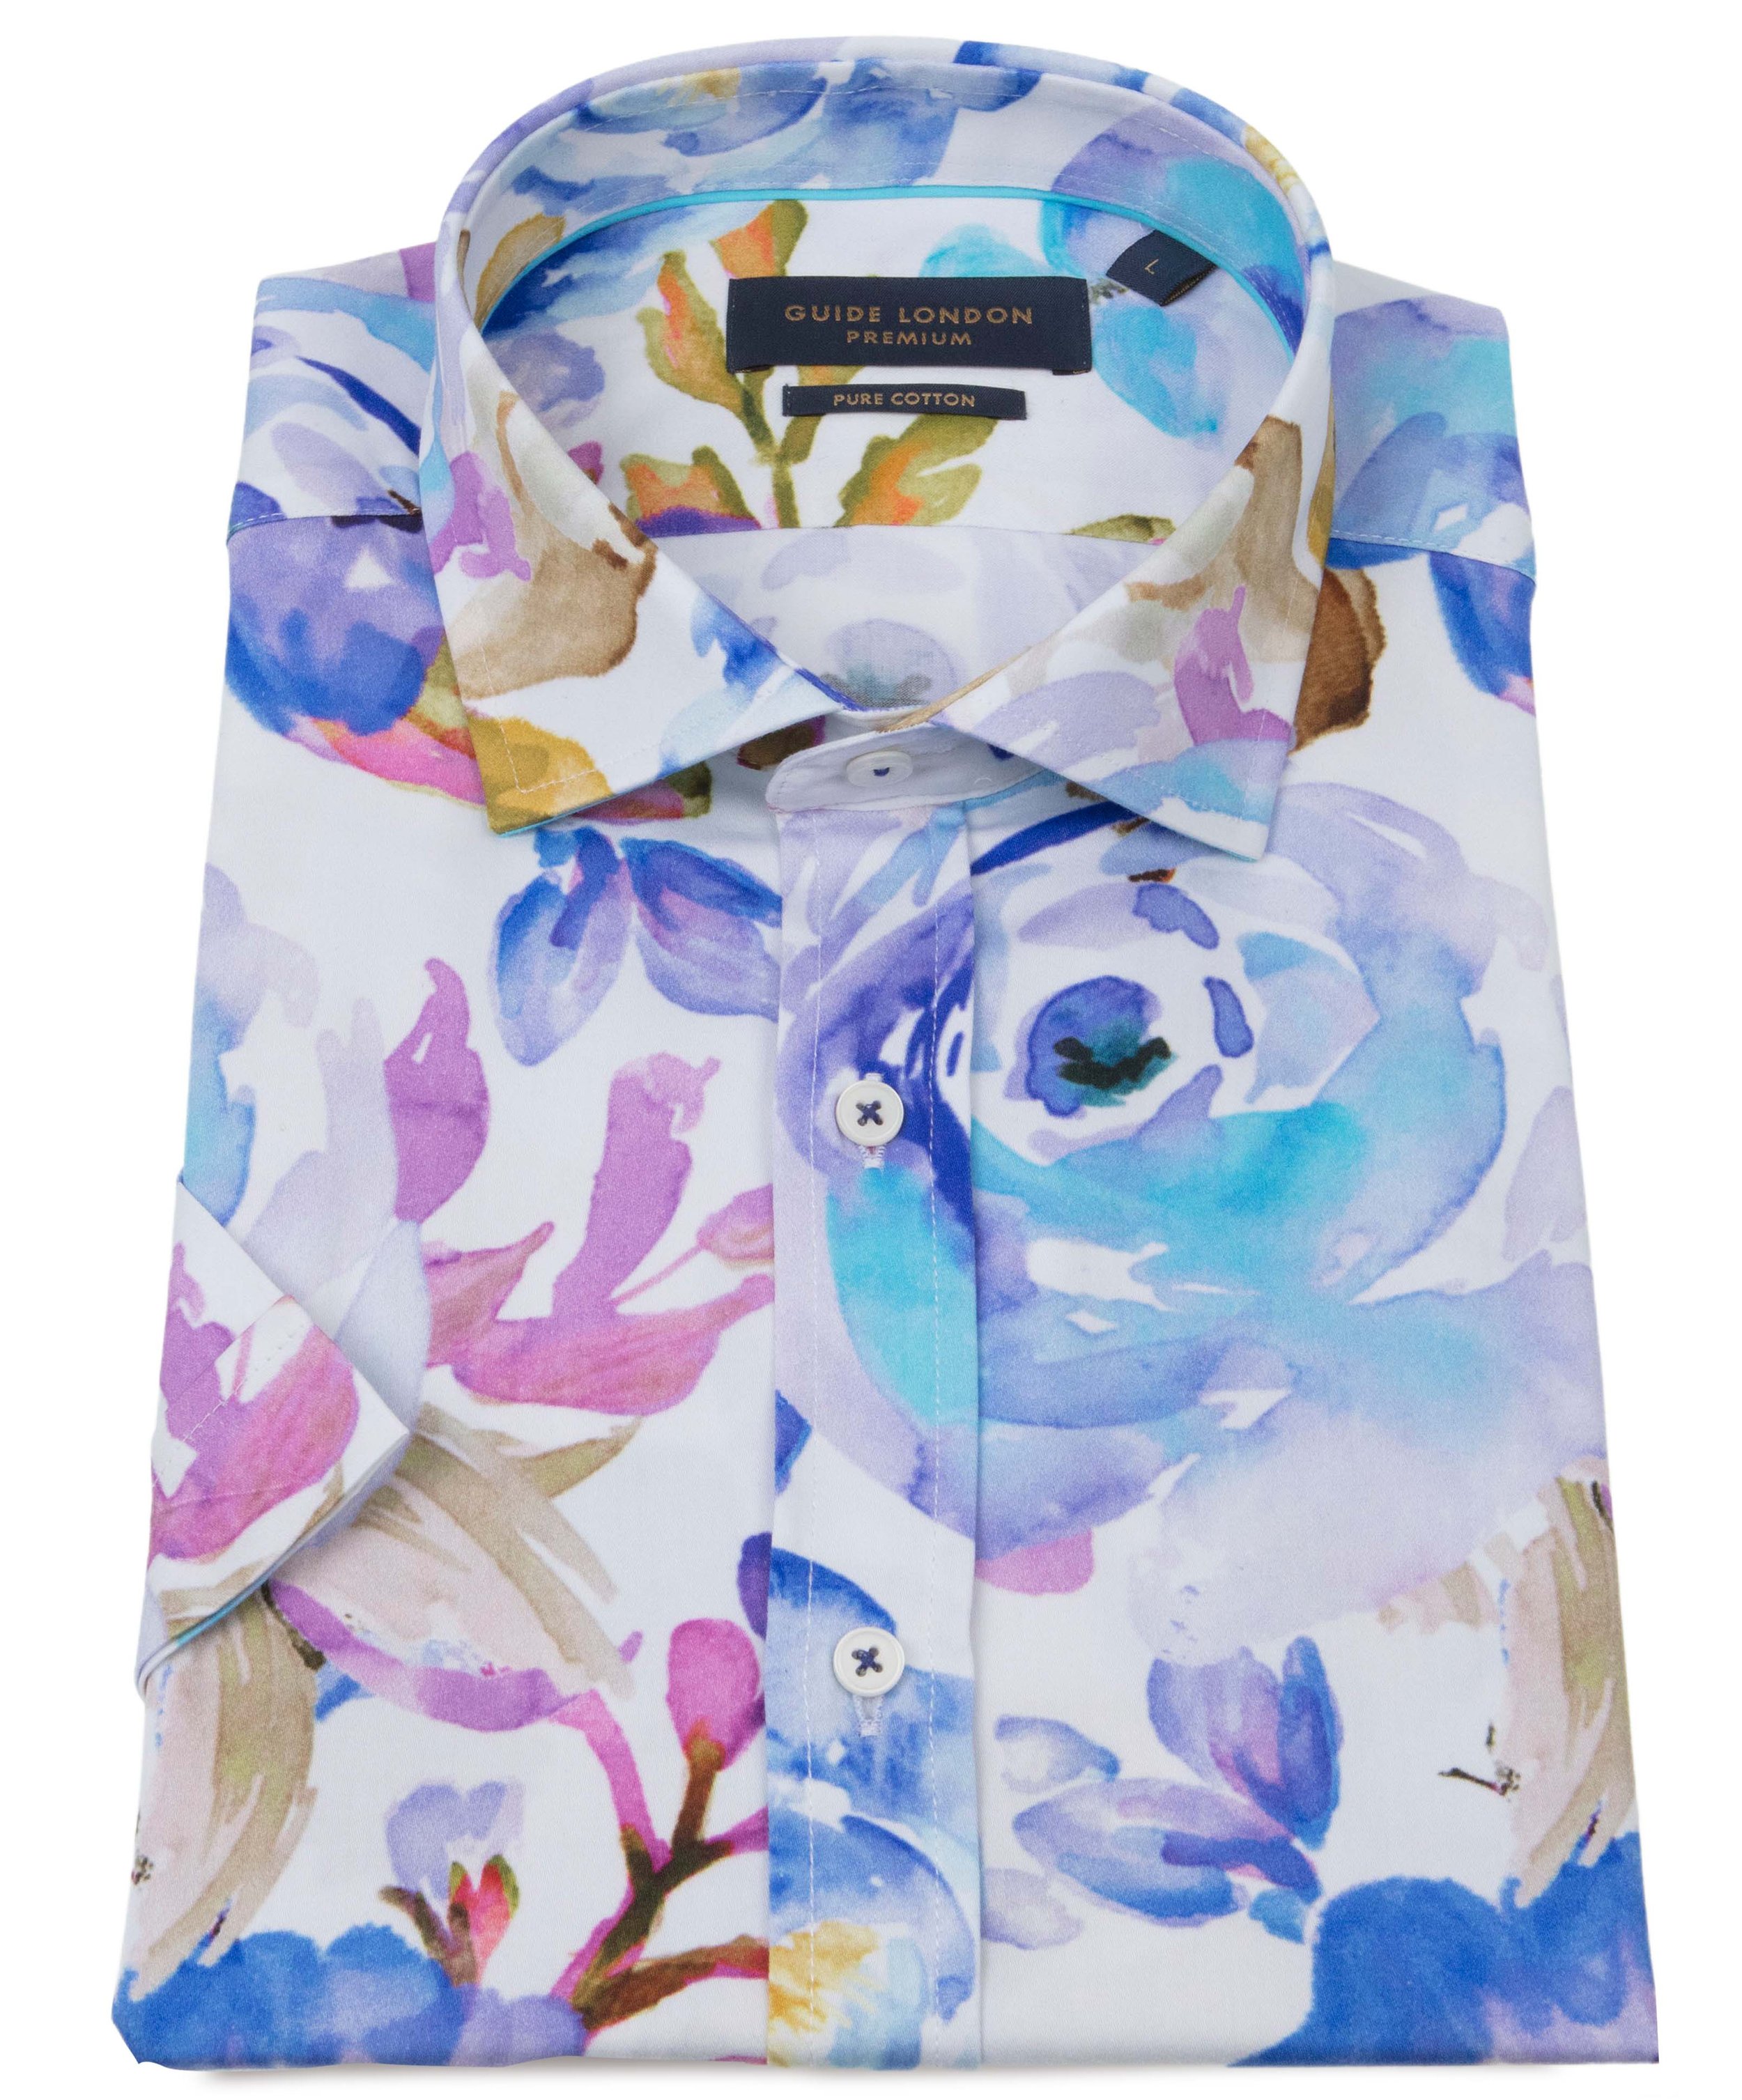 Guide London Short sleeve shirt, White shirt with a large floral design ...